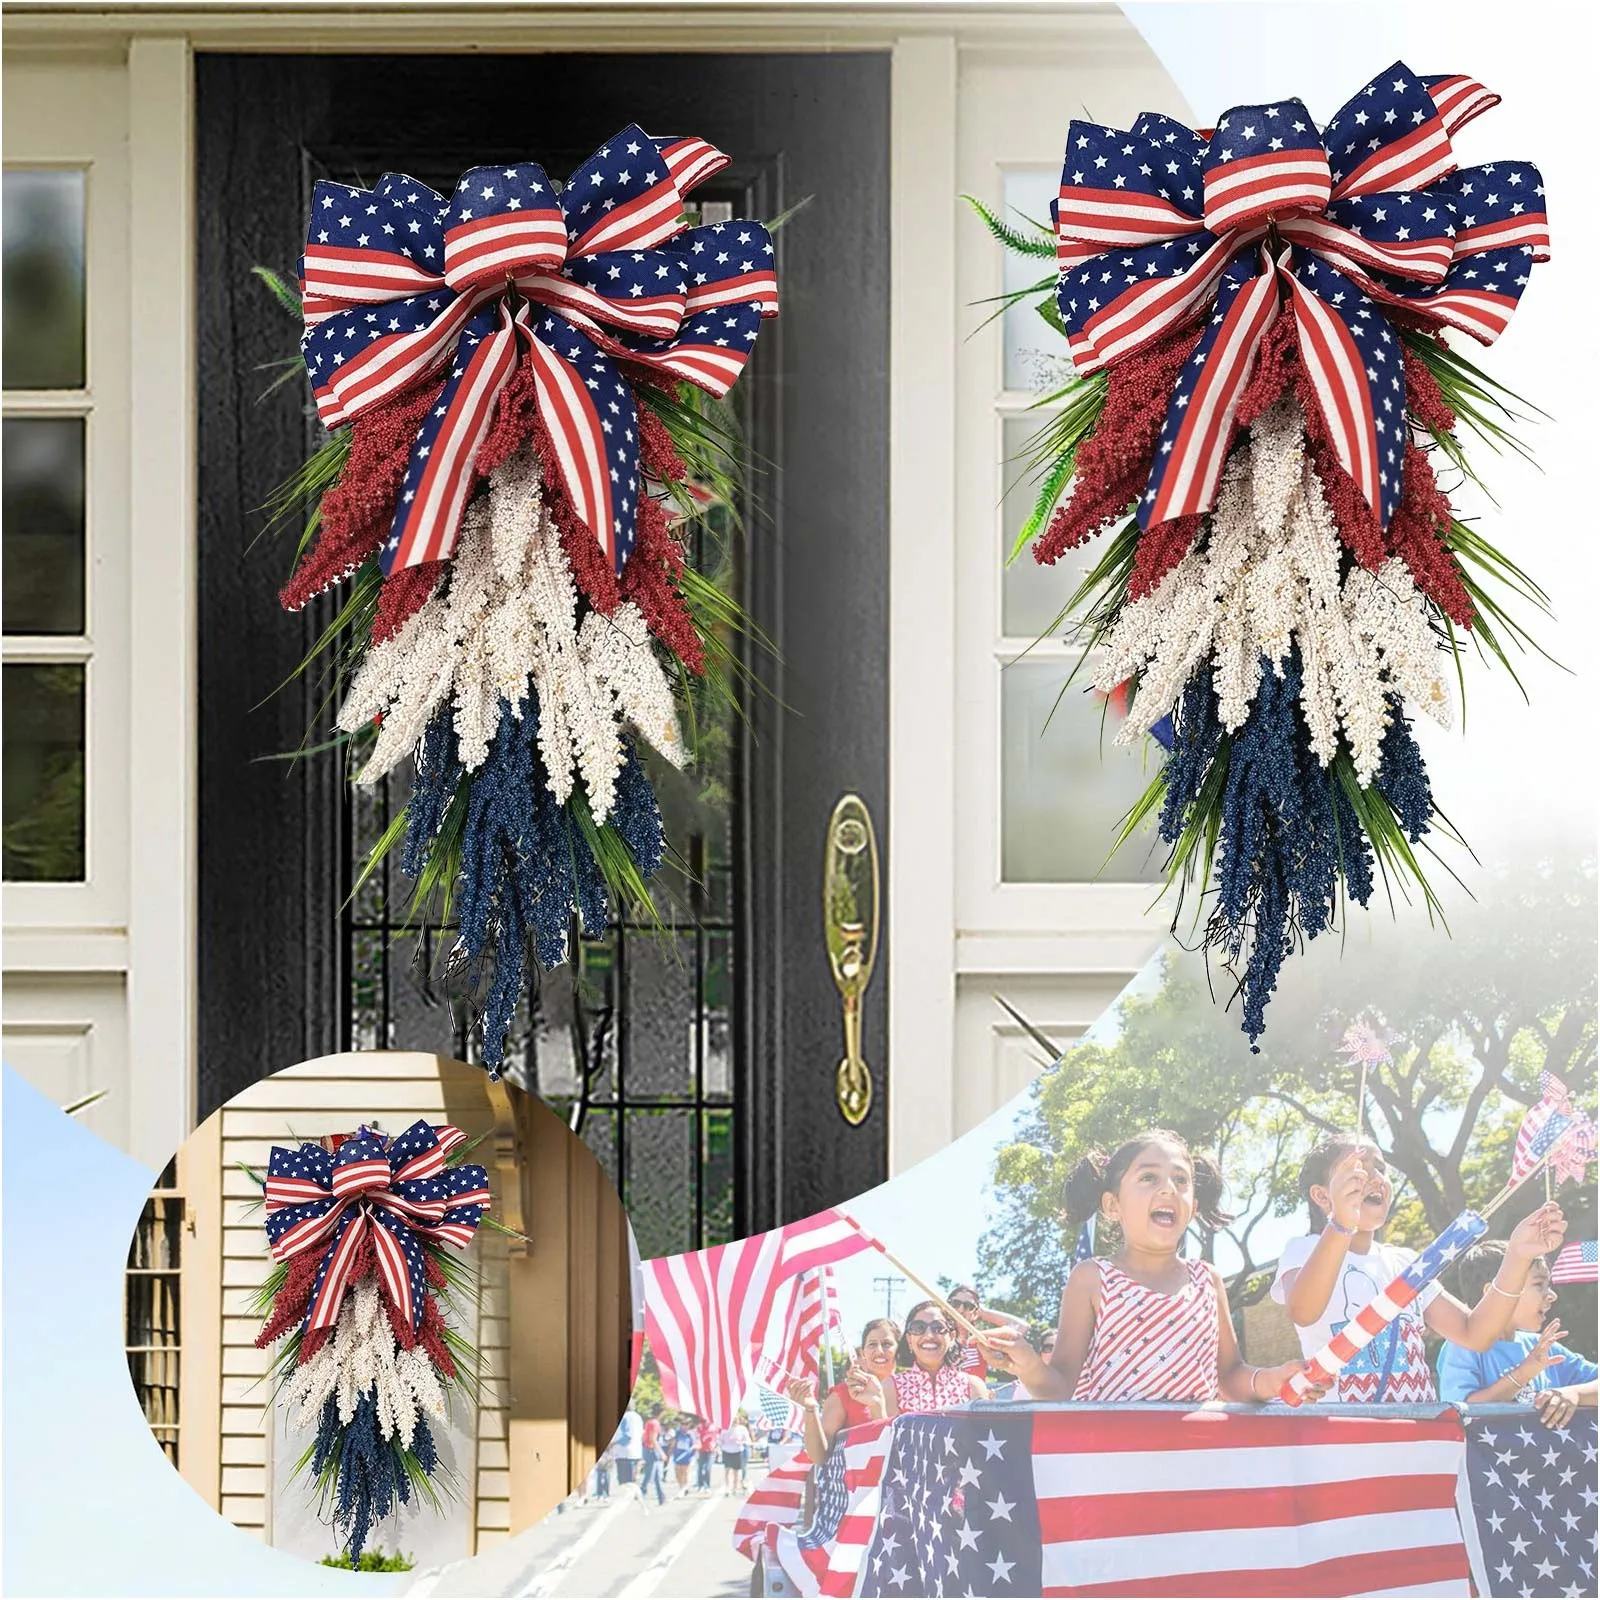 

Independence Day Wreath Handmade Hanging Garland 4th of July National Ornament Home Holiday Door Window Wall Decor Props